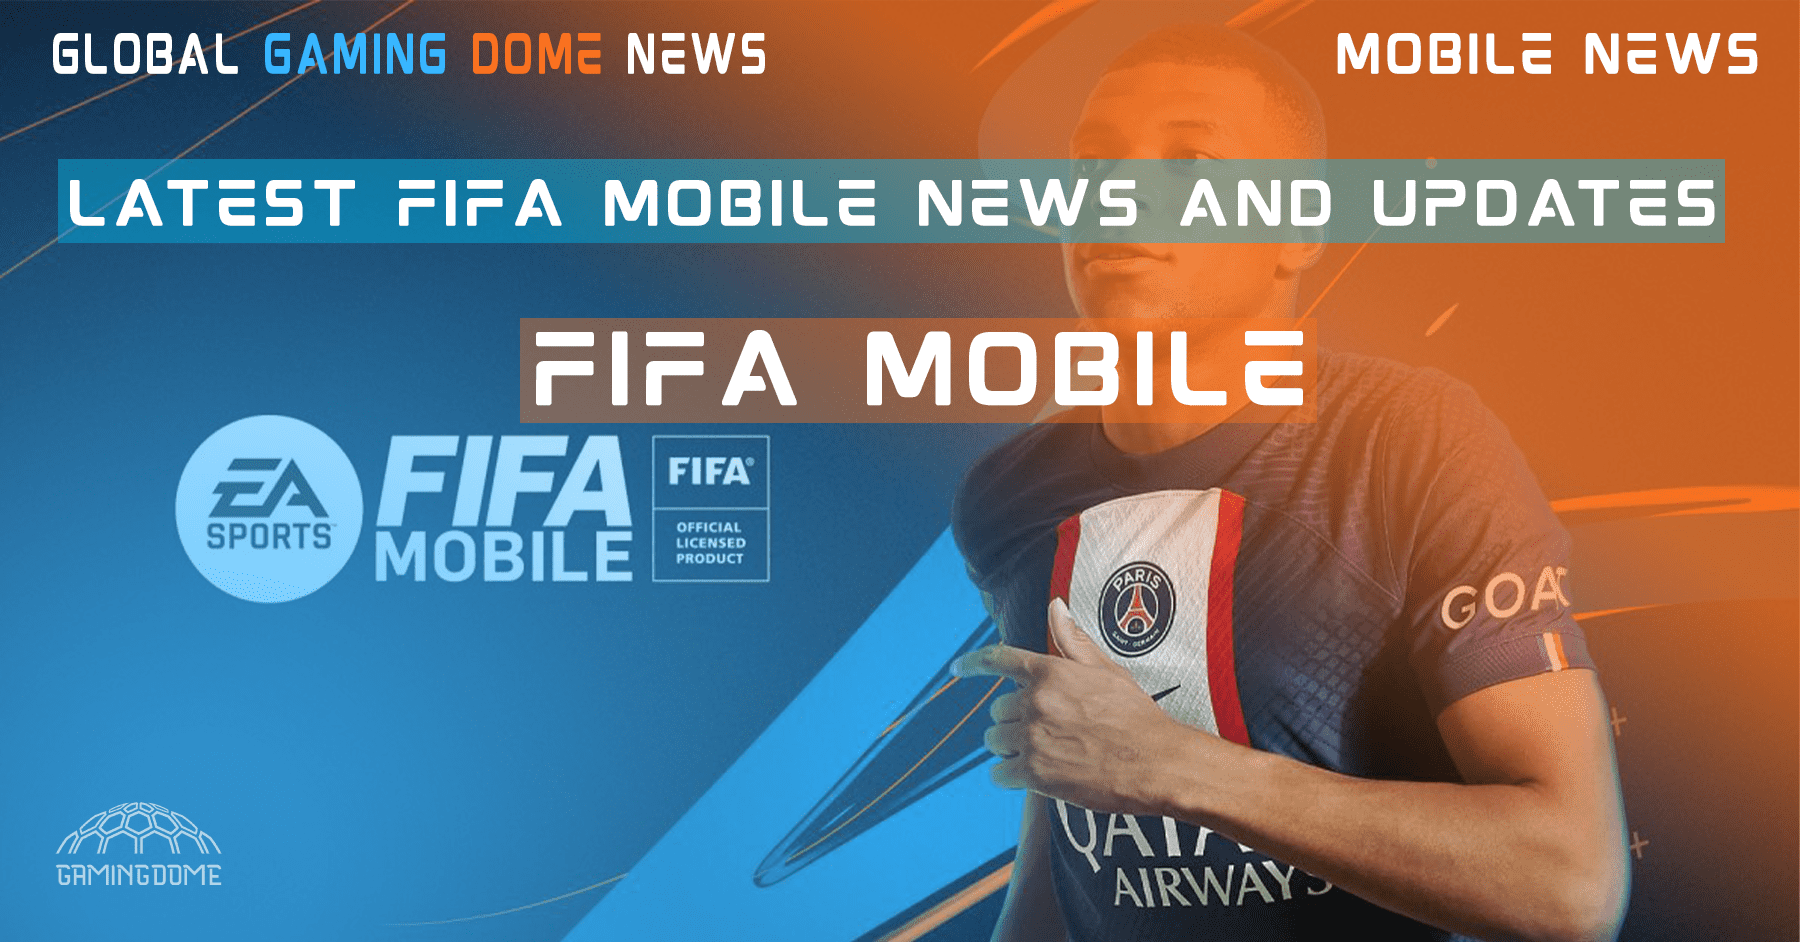 LATEST FIFA MOBILE NEWS AND UPDATES